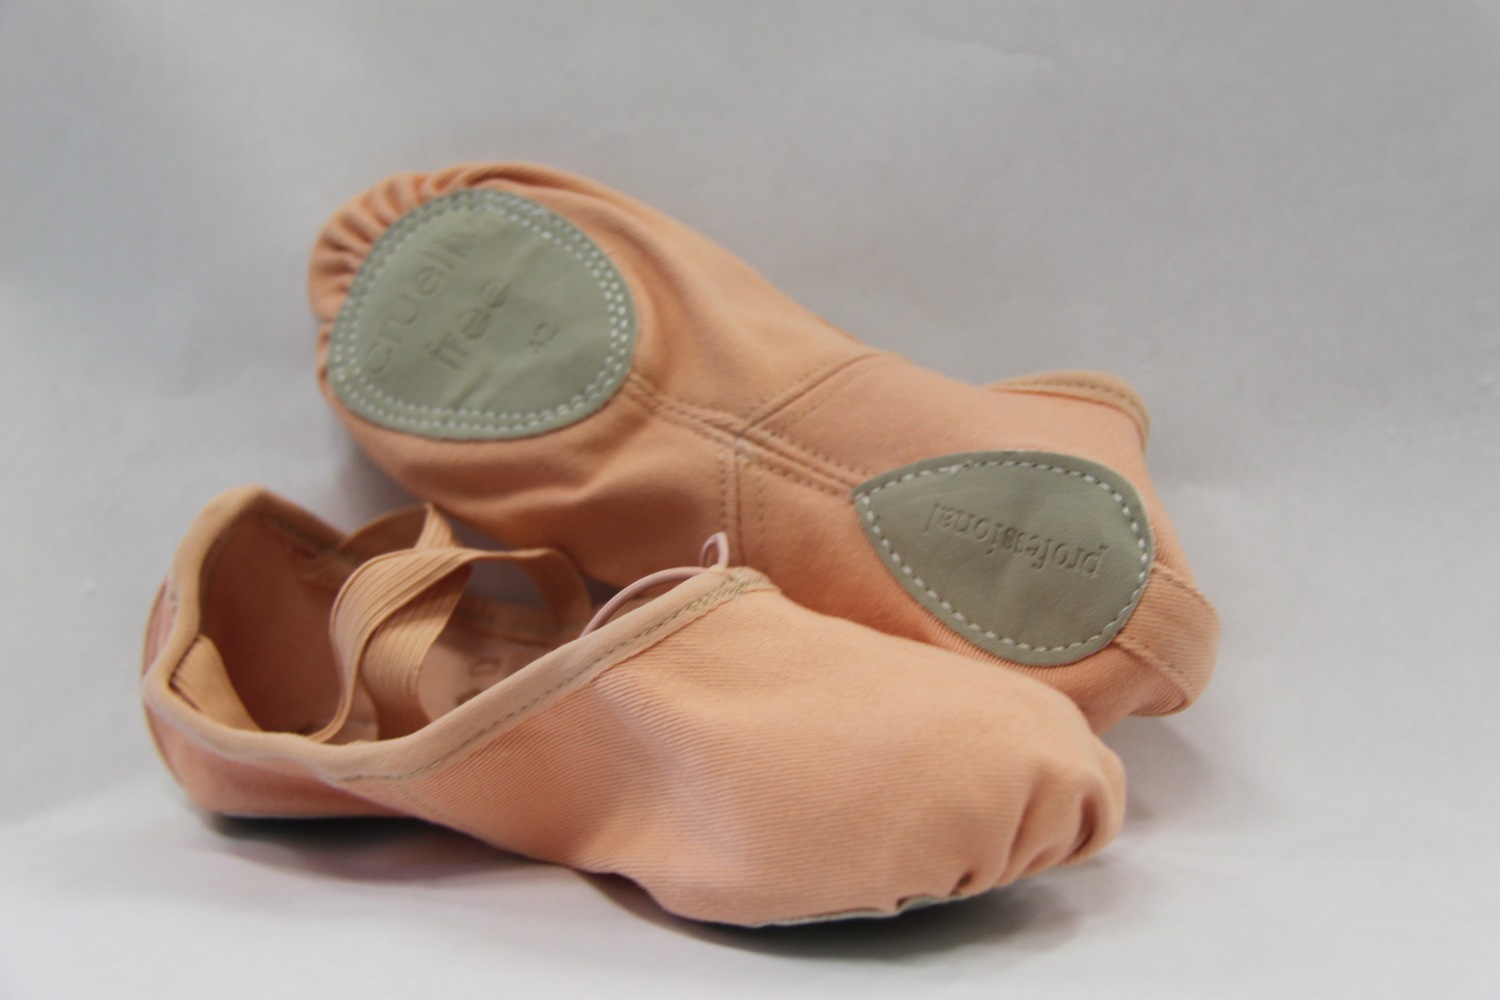 Cynthia King's Stretch-Canvas Vegan Ballet Slippers Make Your Feet Look Amazing